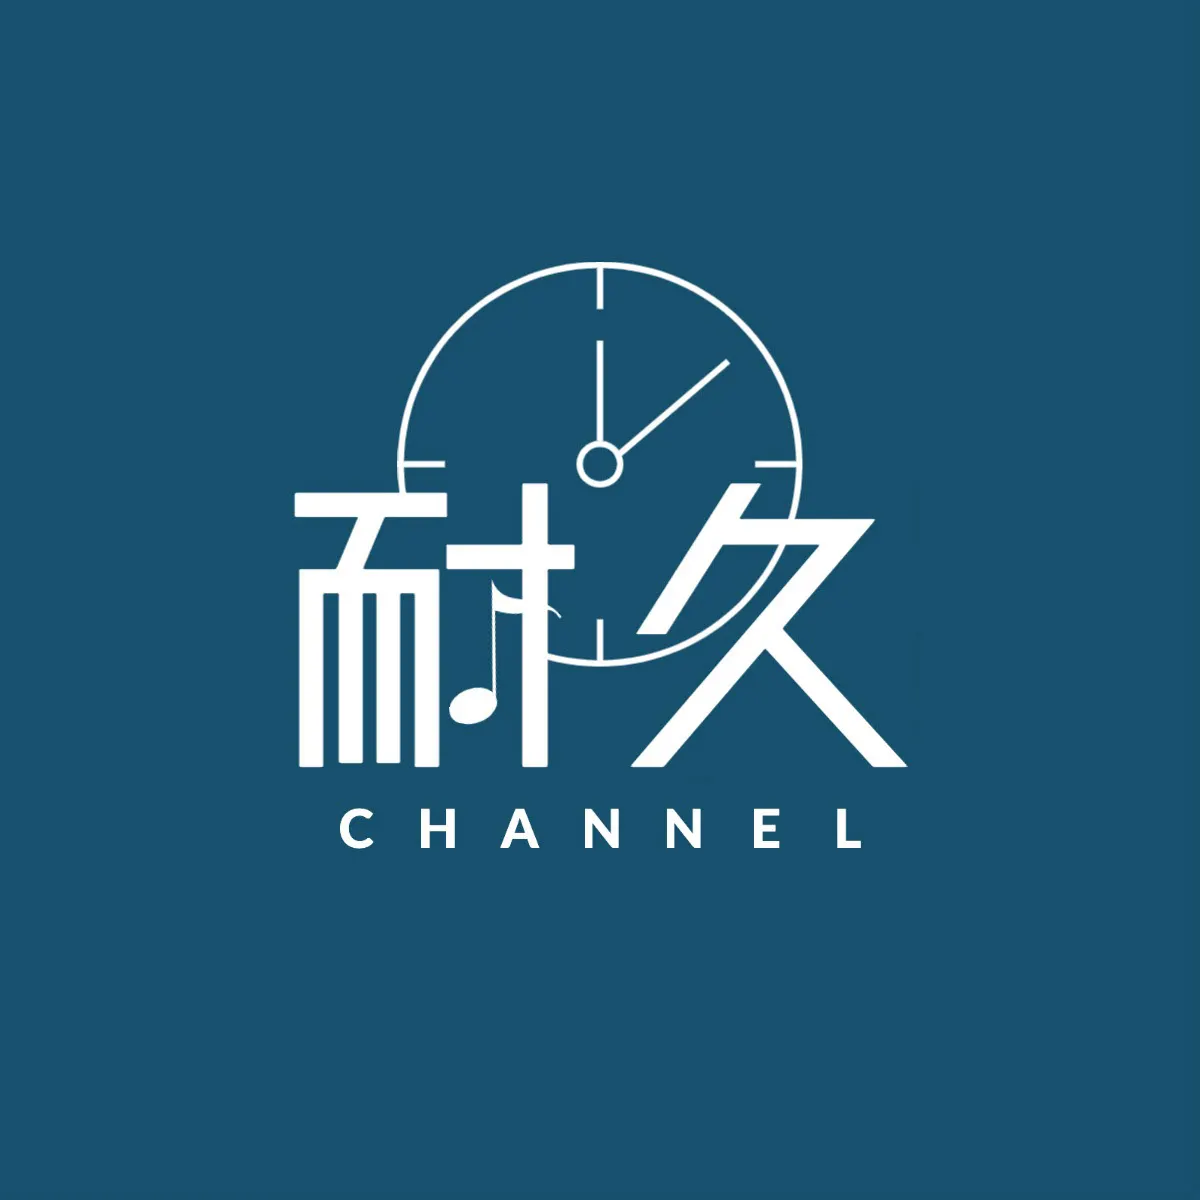 Durable channel YouTube logo